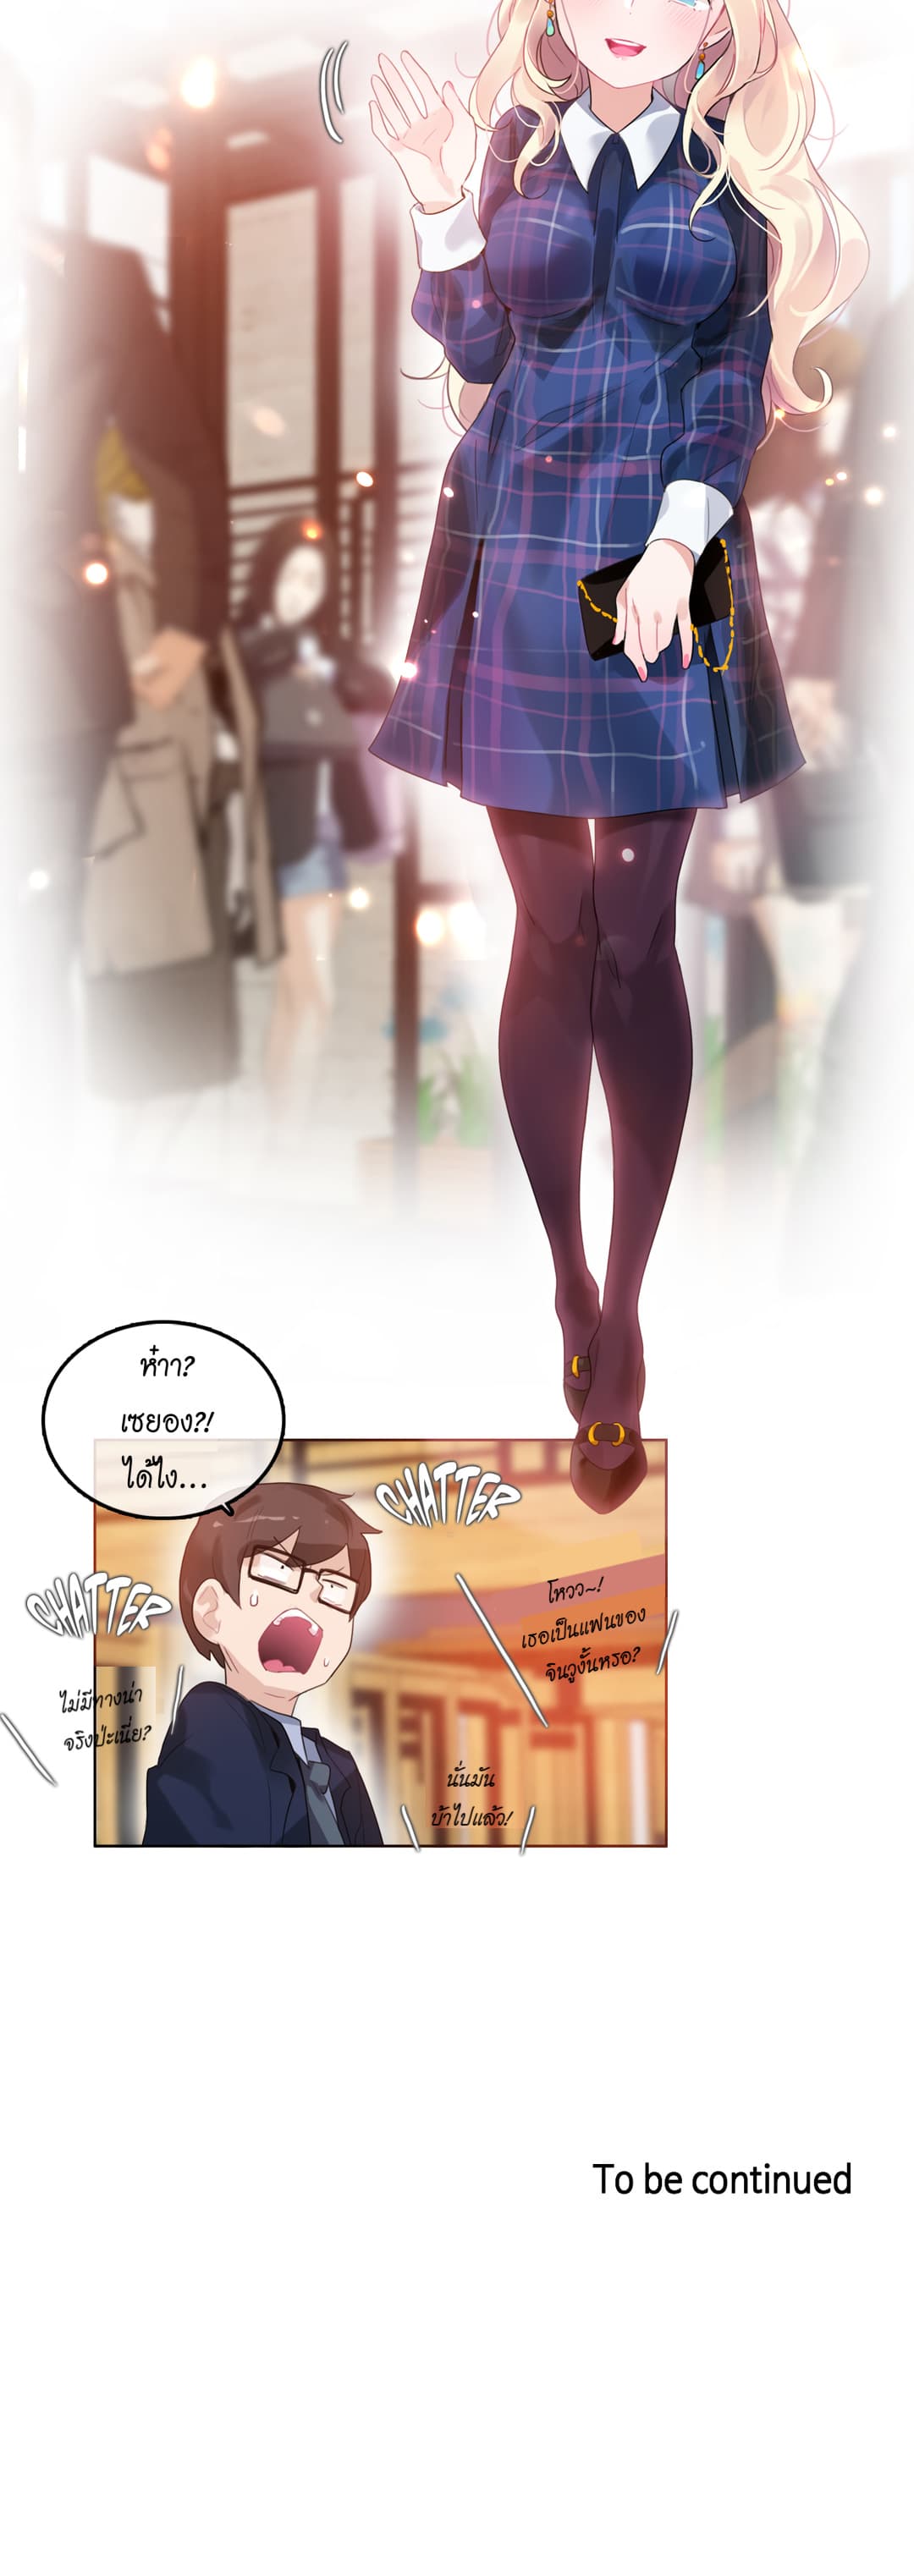 A Pervert’s Daily Life 42 (22)